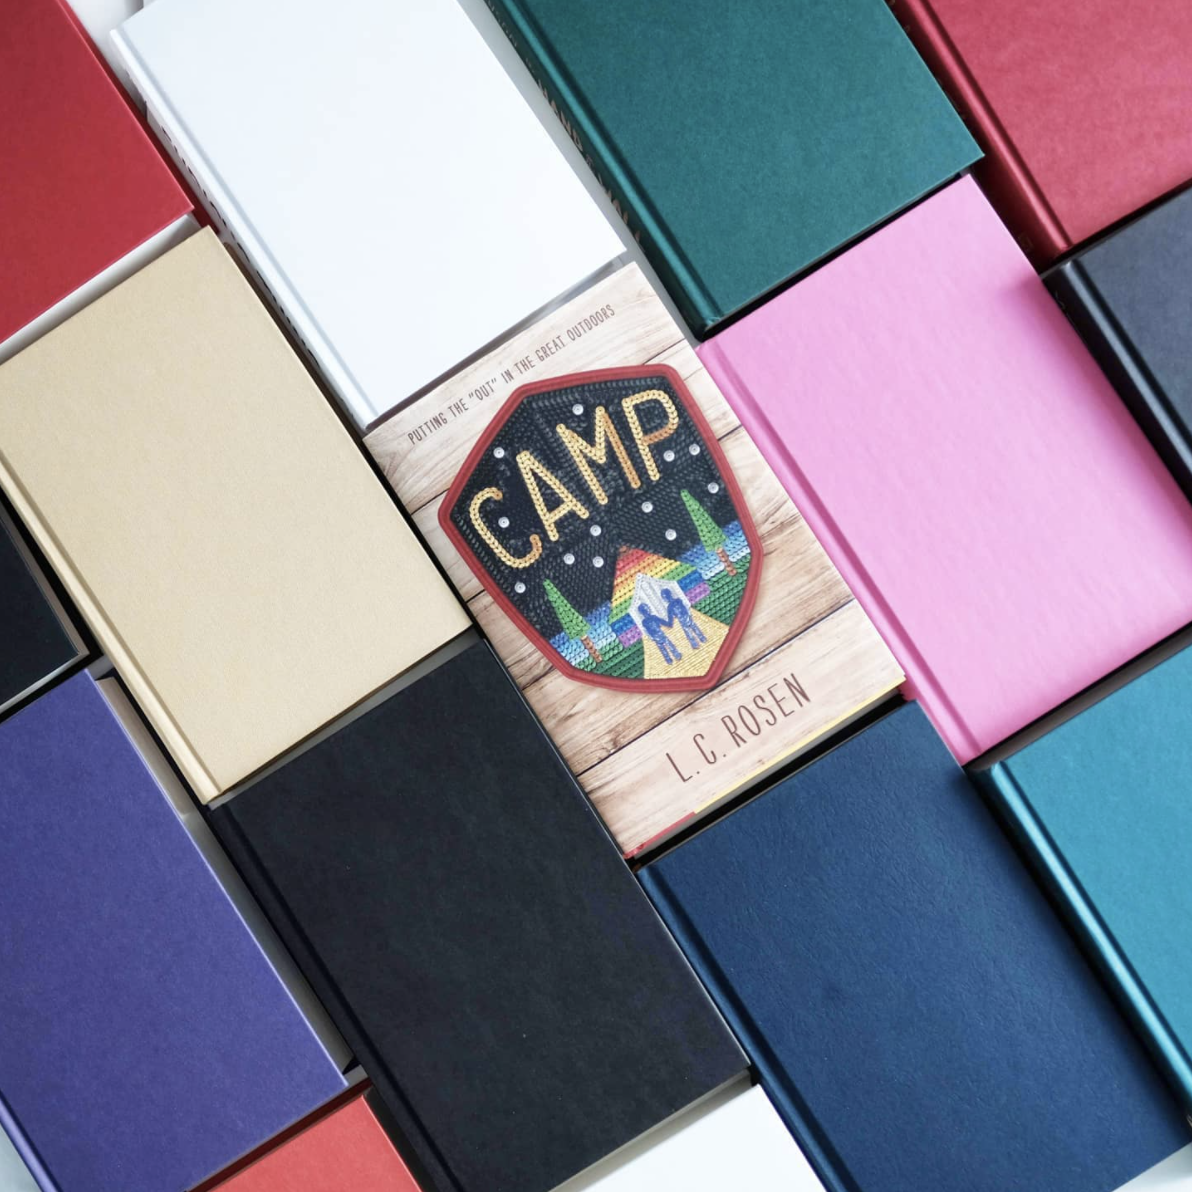 NOVL - Instagram image of book cover for 'Camp' by L.C. Rosen sitting directly in the middle of columns of multicolored hardcover books